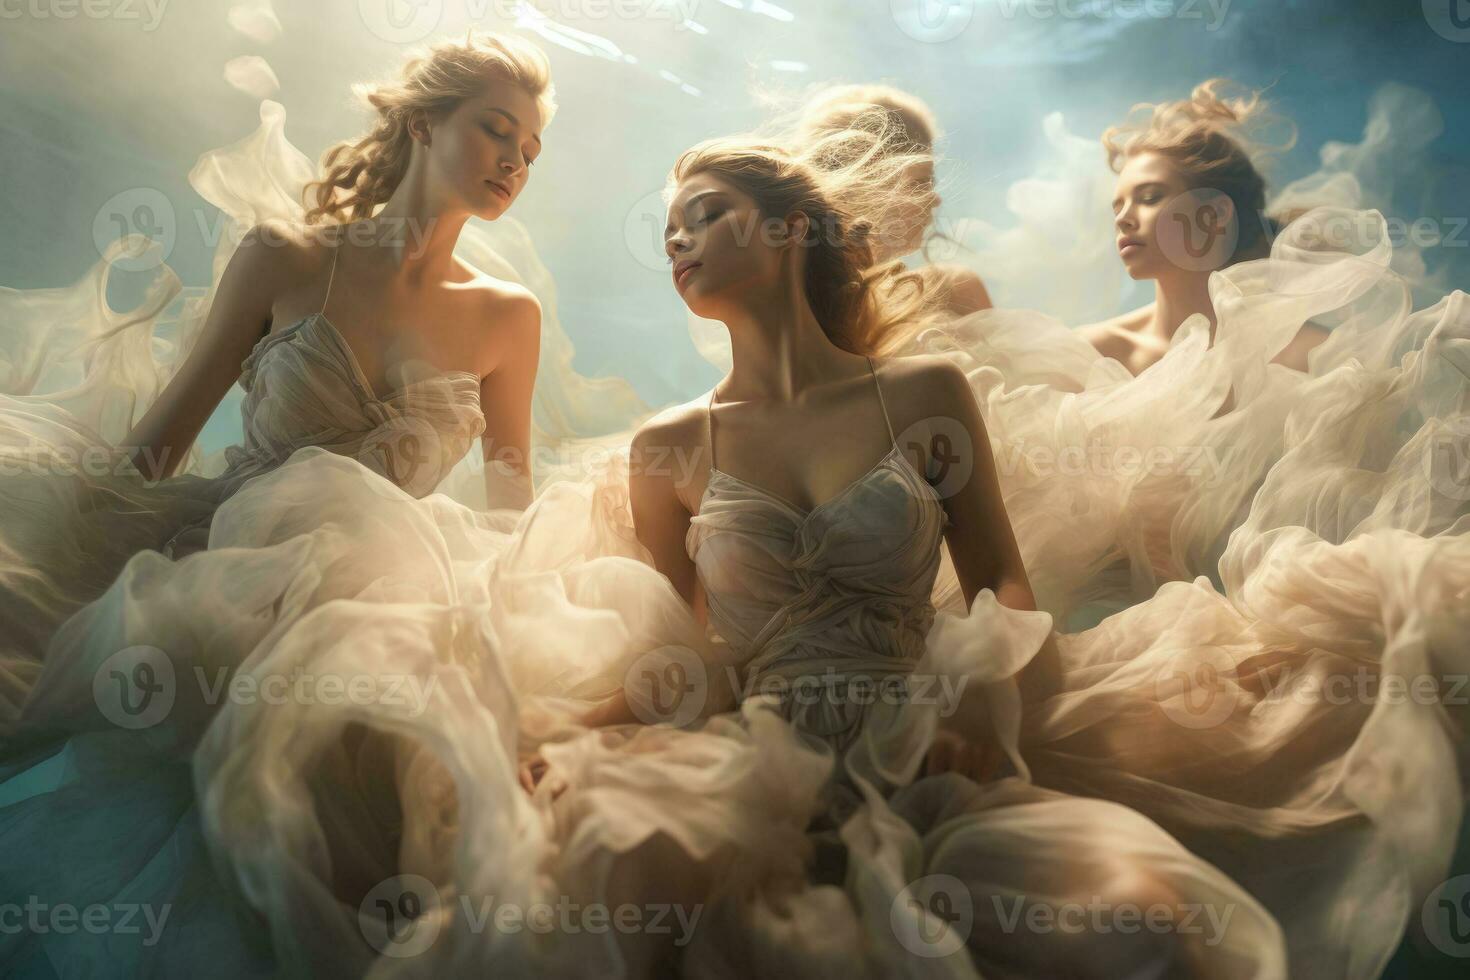 Dancers resting on ethereal clouds submerged in a dreamy mystical sky photo